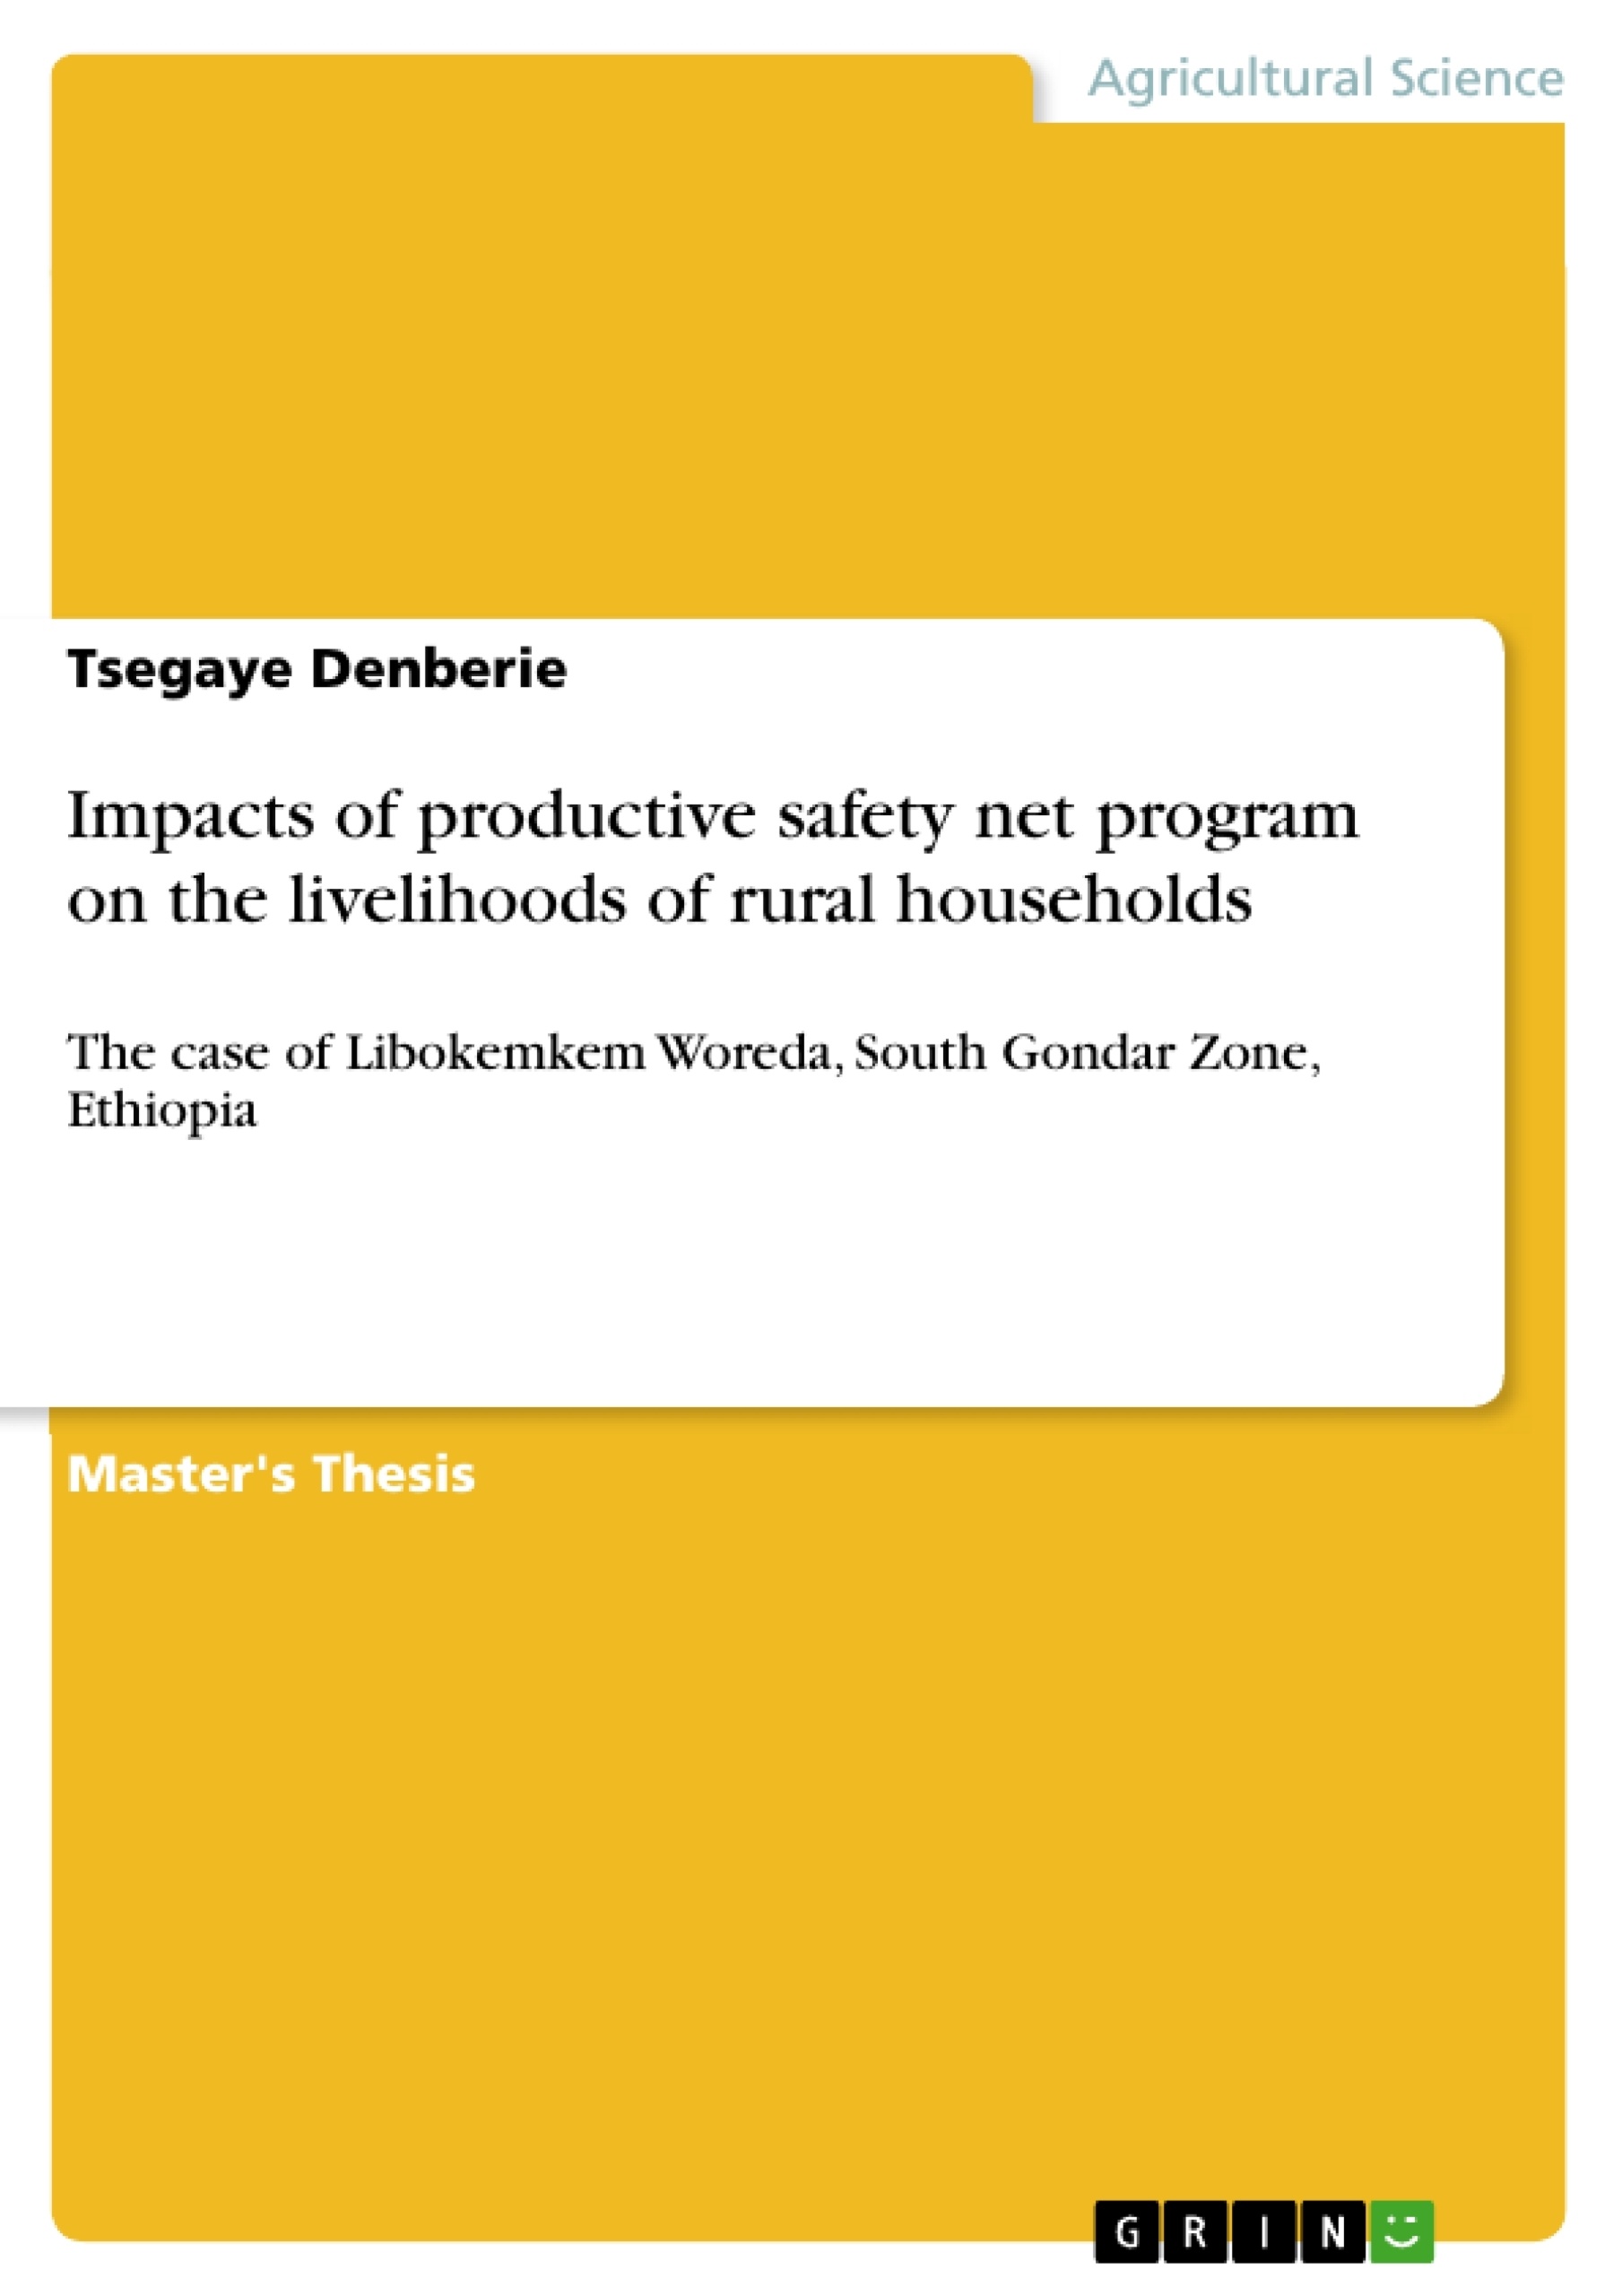 Title: Impacts of productive safety net program on the livelihoods of rural households